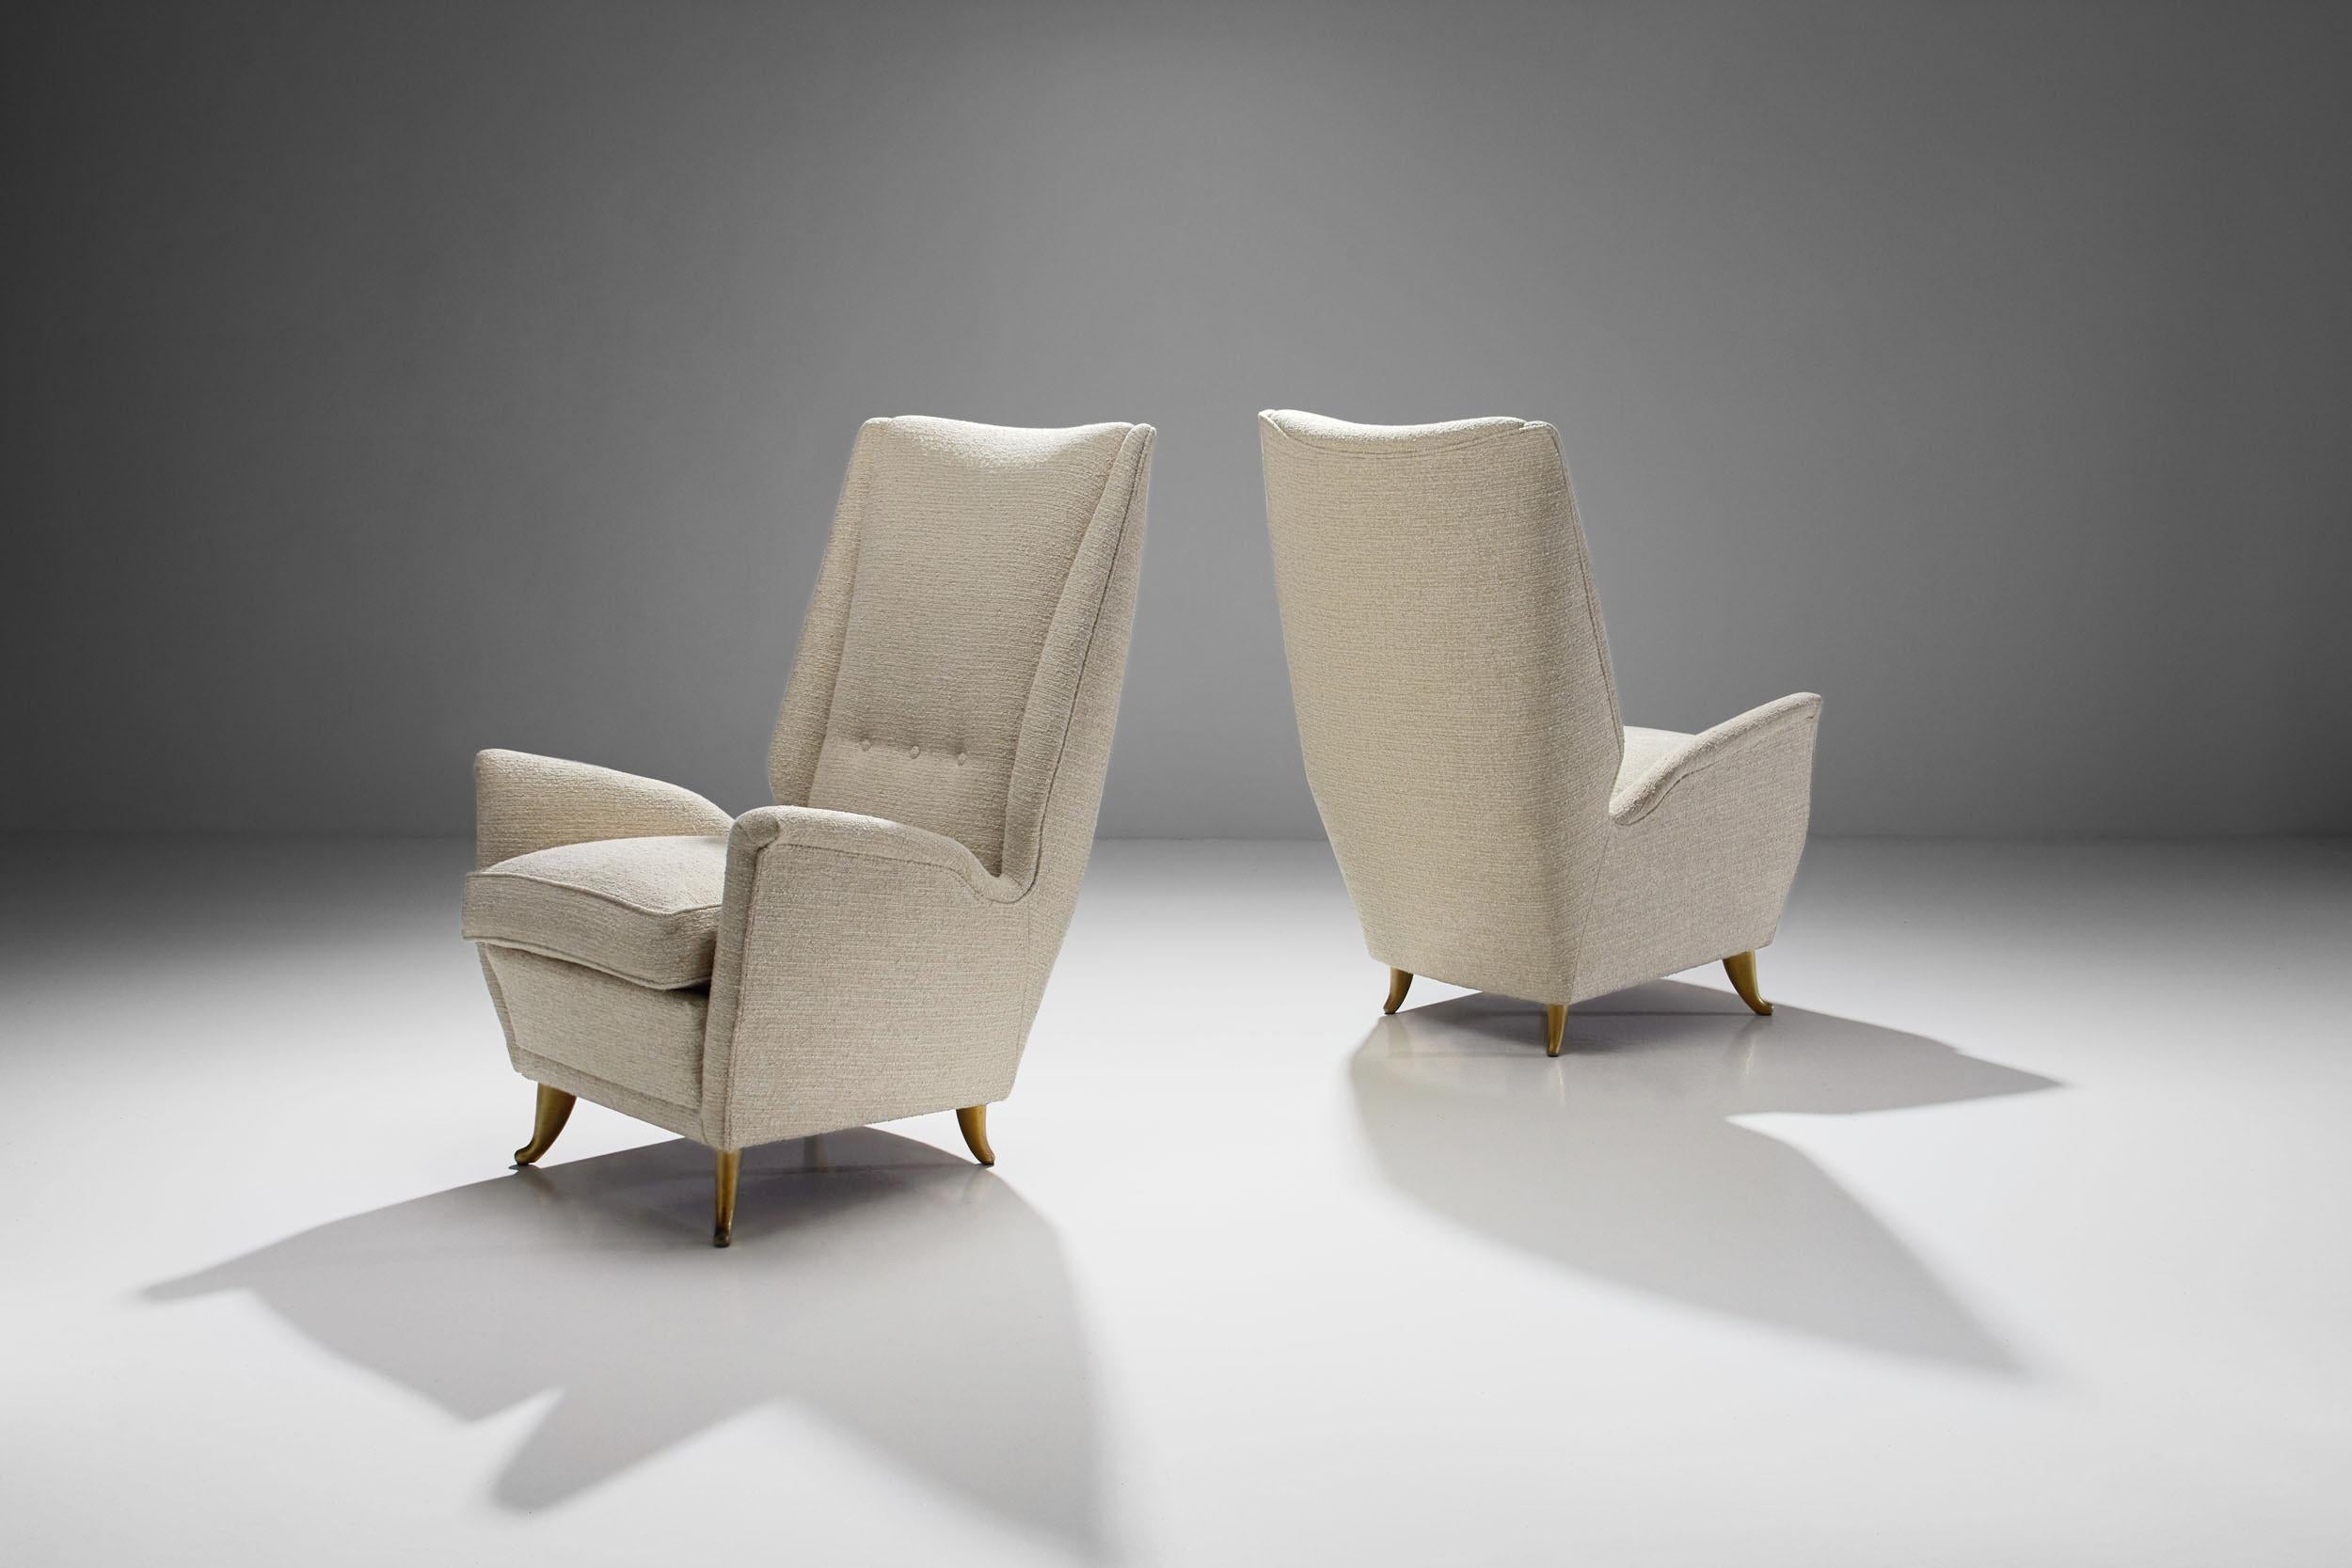 This elegant pair of lounge chairs is attributed to the Italian designer Gio Ponti and was produced by ISA Bergamo in Italy during the 1950s. Several of Ponti’s designs had been manufactured by the ISA company in the late 1940s and ‘50s.

The chairs